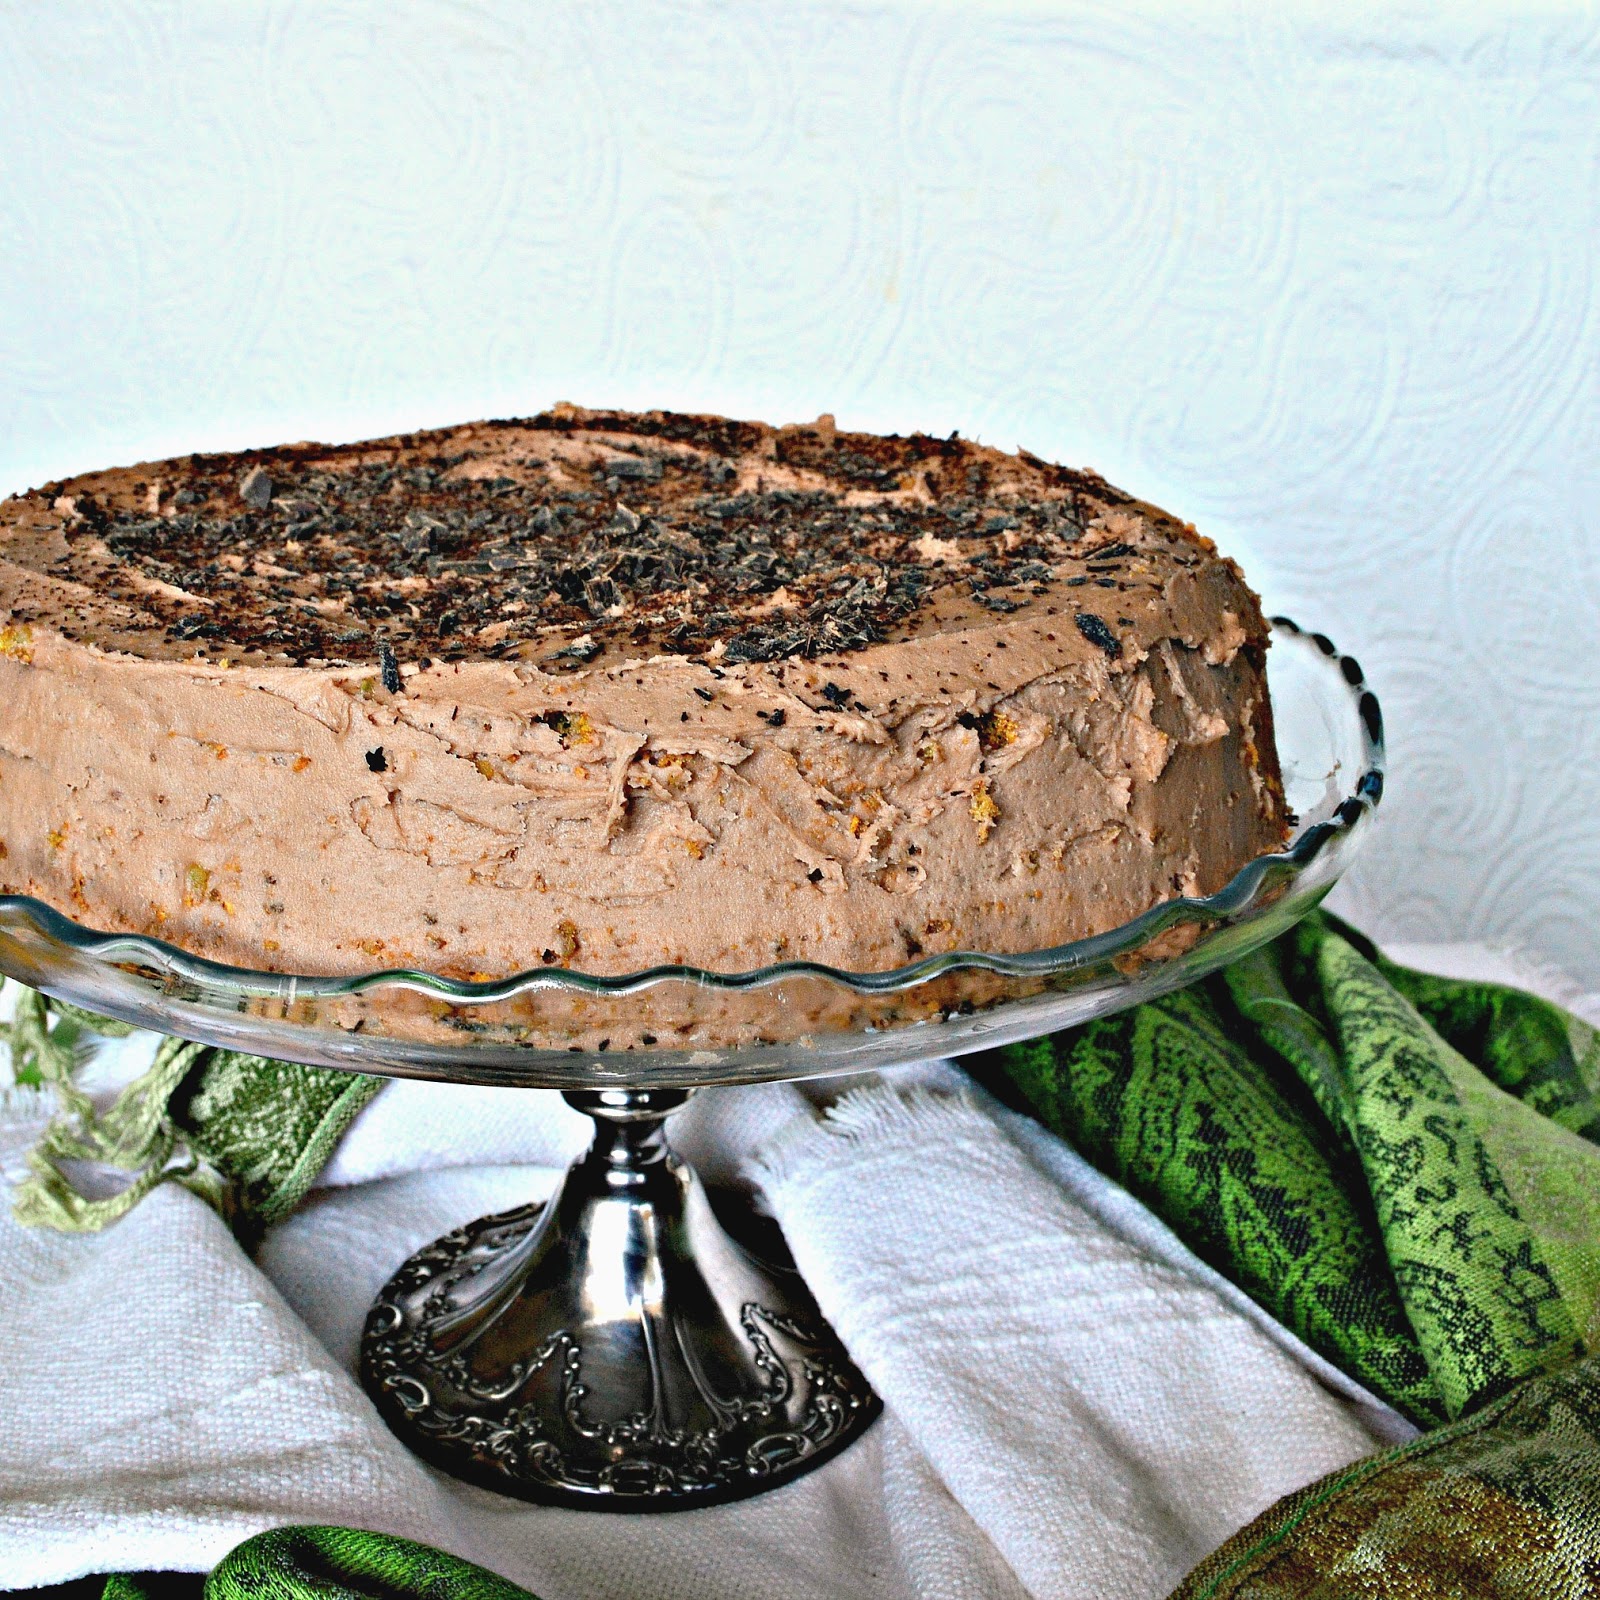 Ilse S Passover Mocha Nut Cake Or Simply Ilse S Cake This Is How I Cook